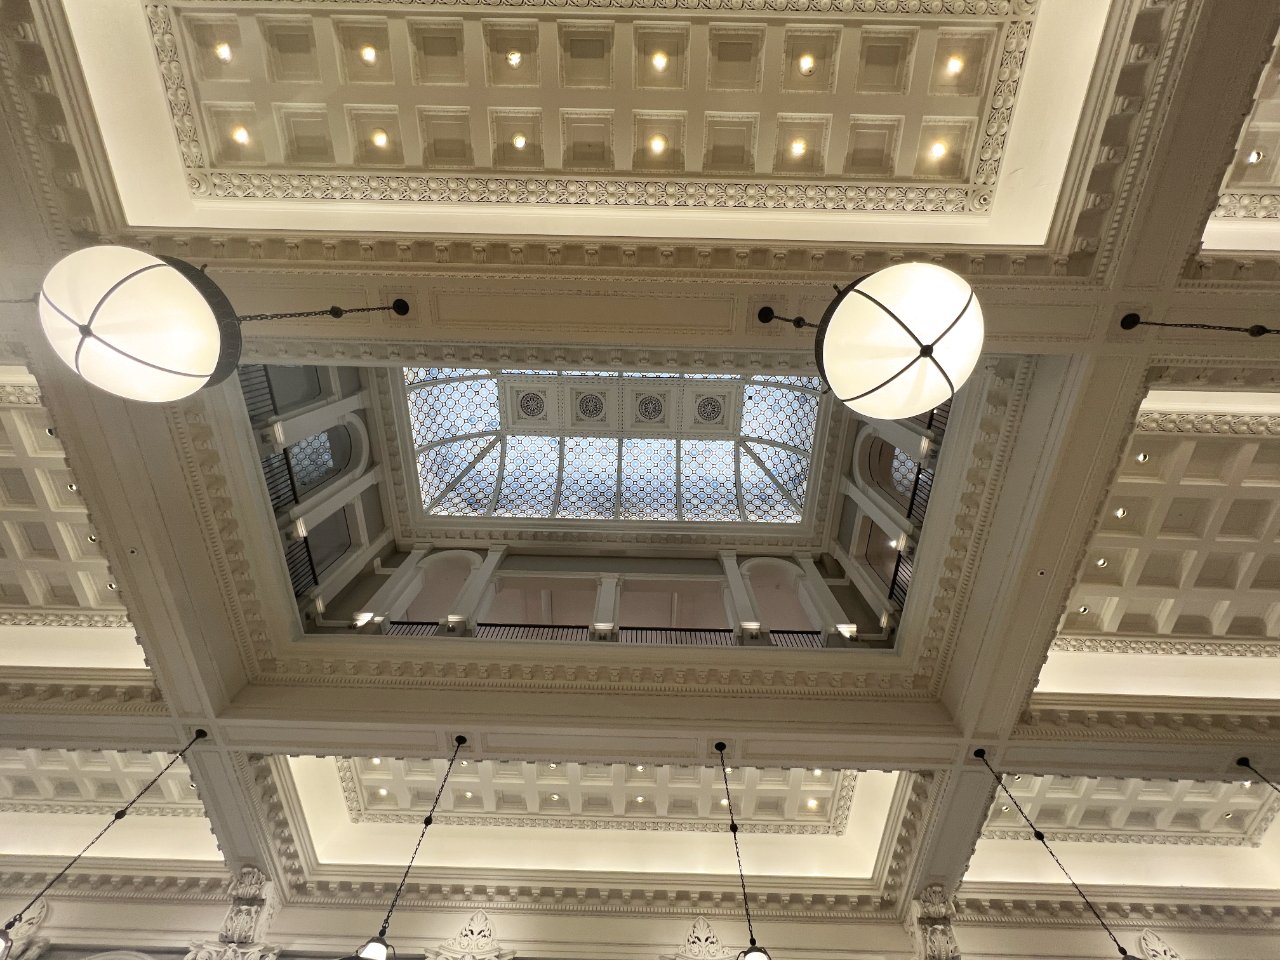 You might have seen this original skylight when it was a bookstore, but Apple has made it more interesting.